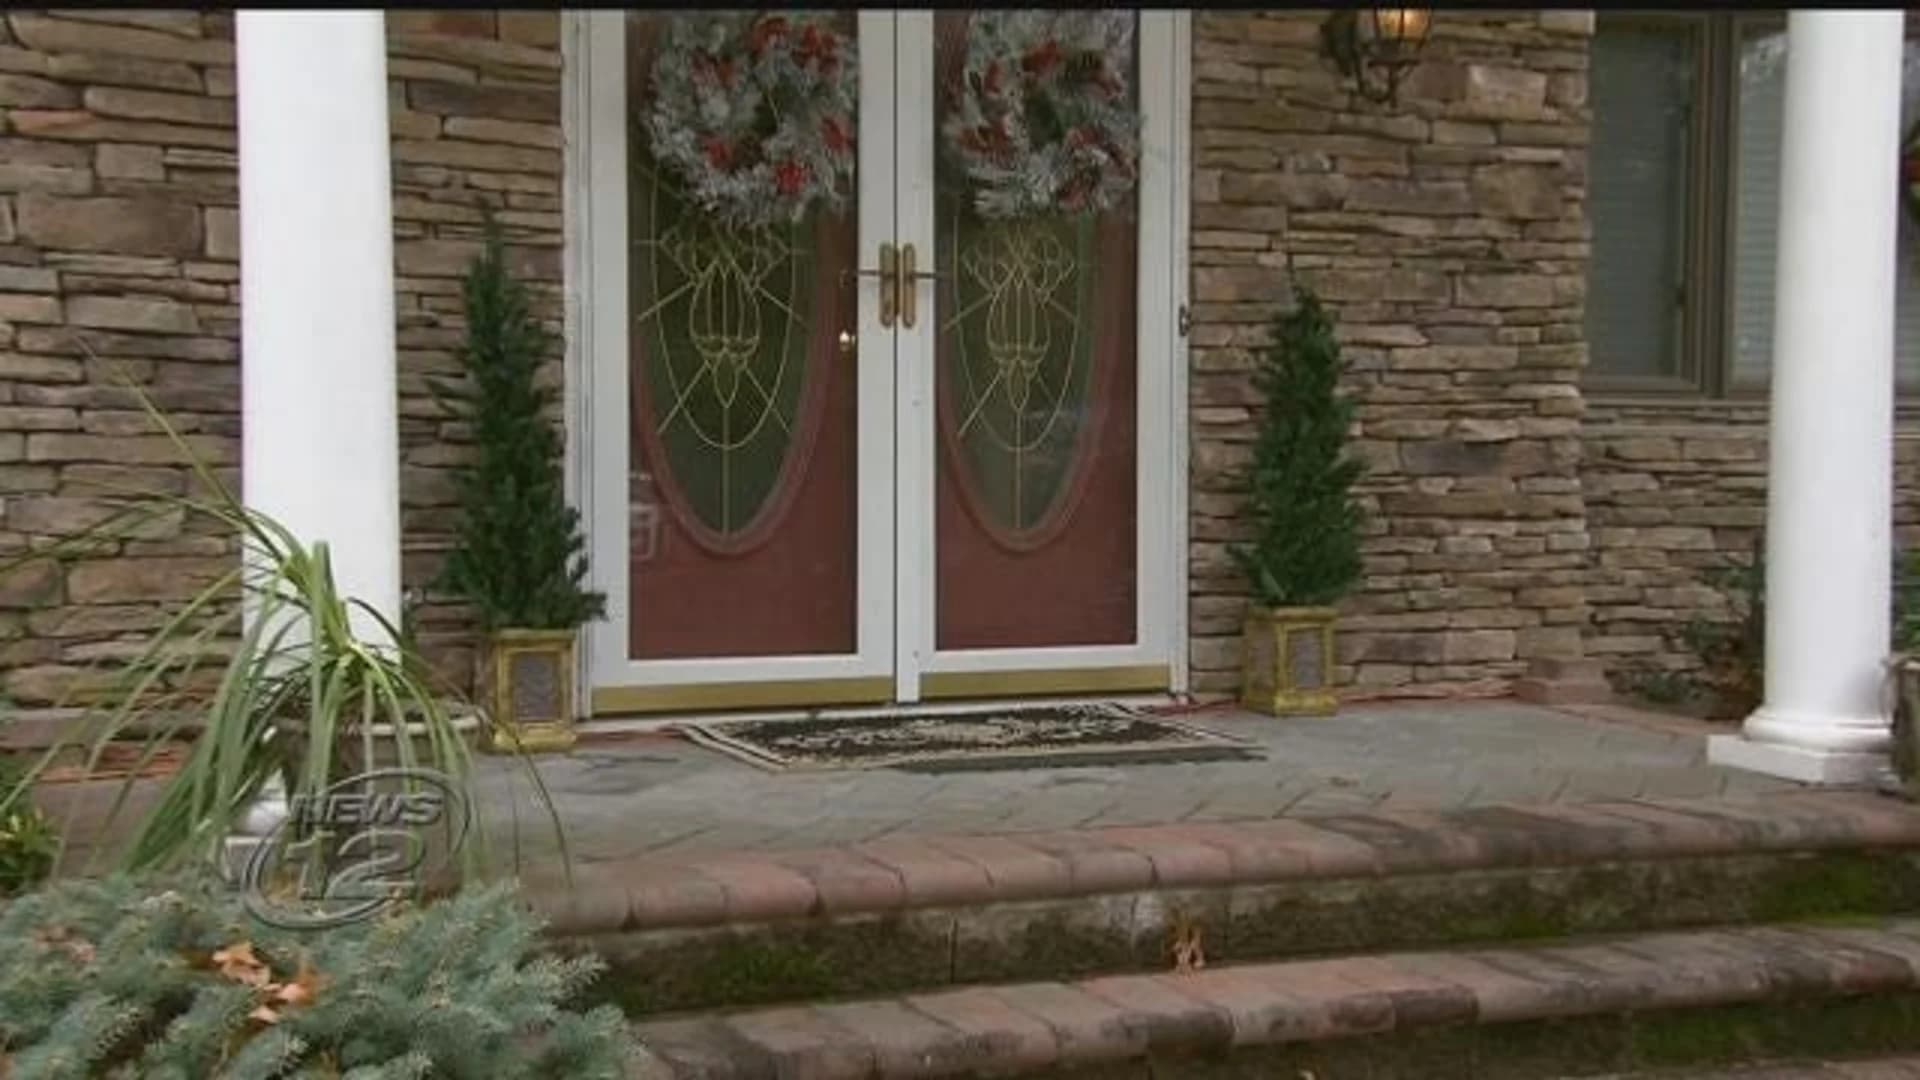 Melville homeowners say packages were stolen off front porch